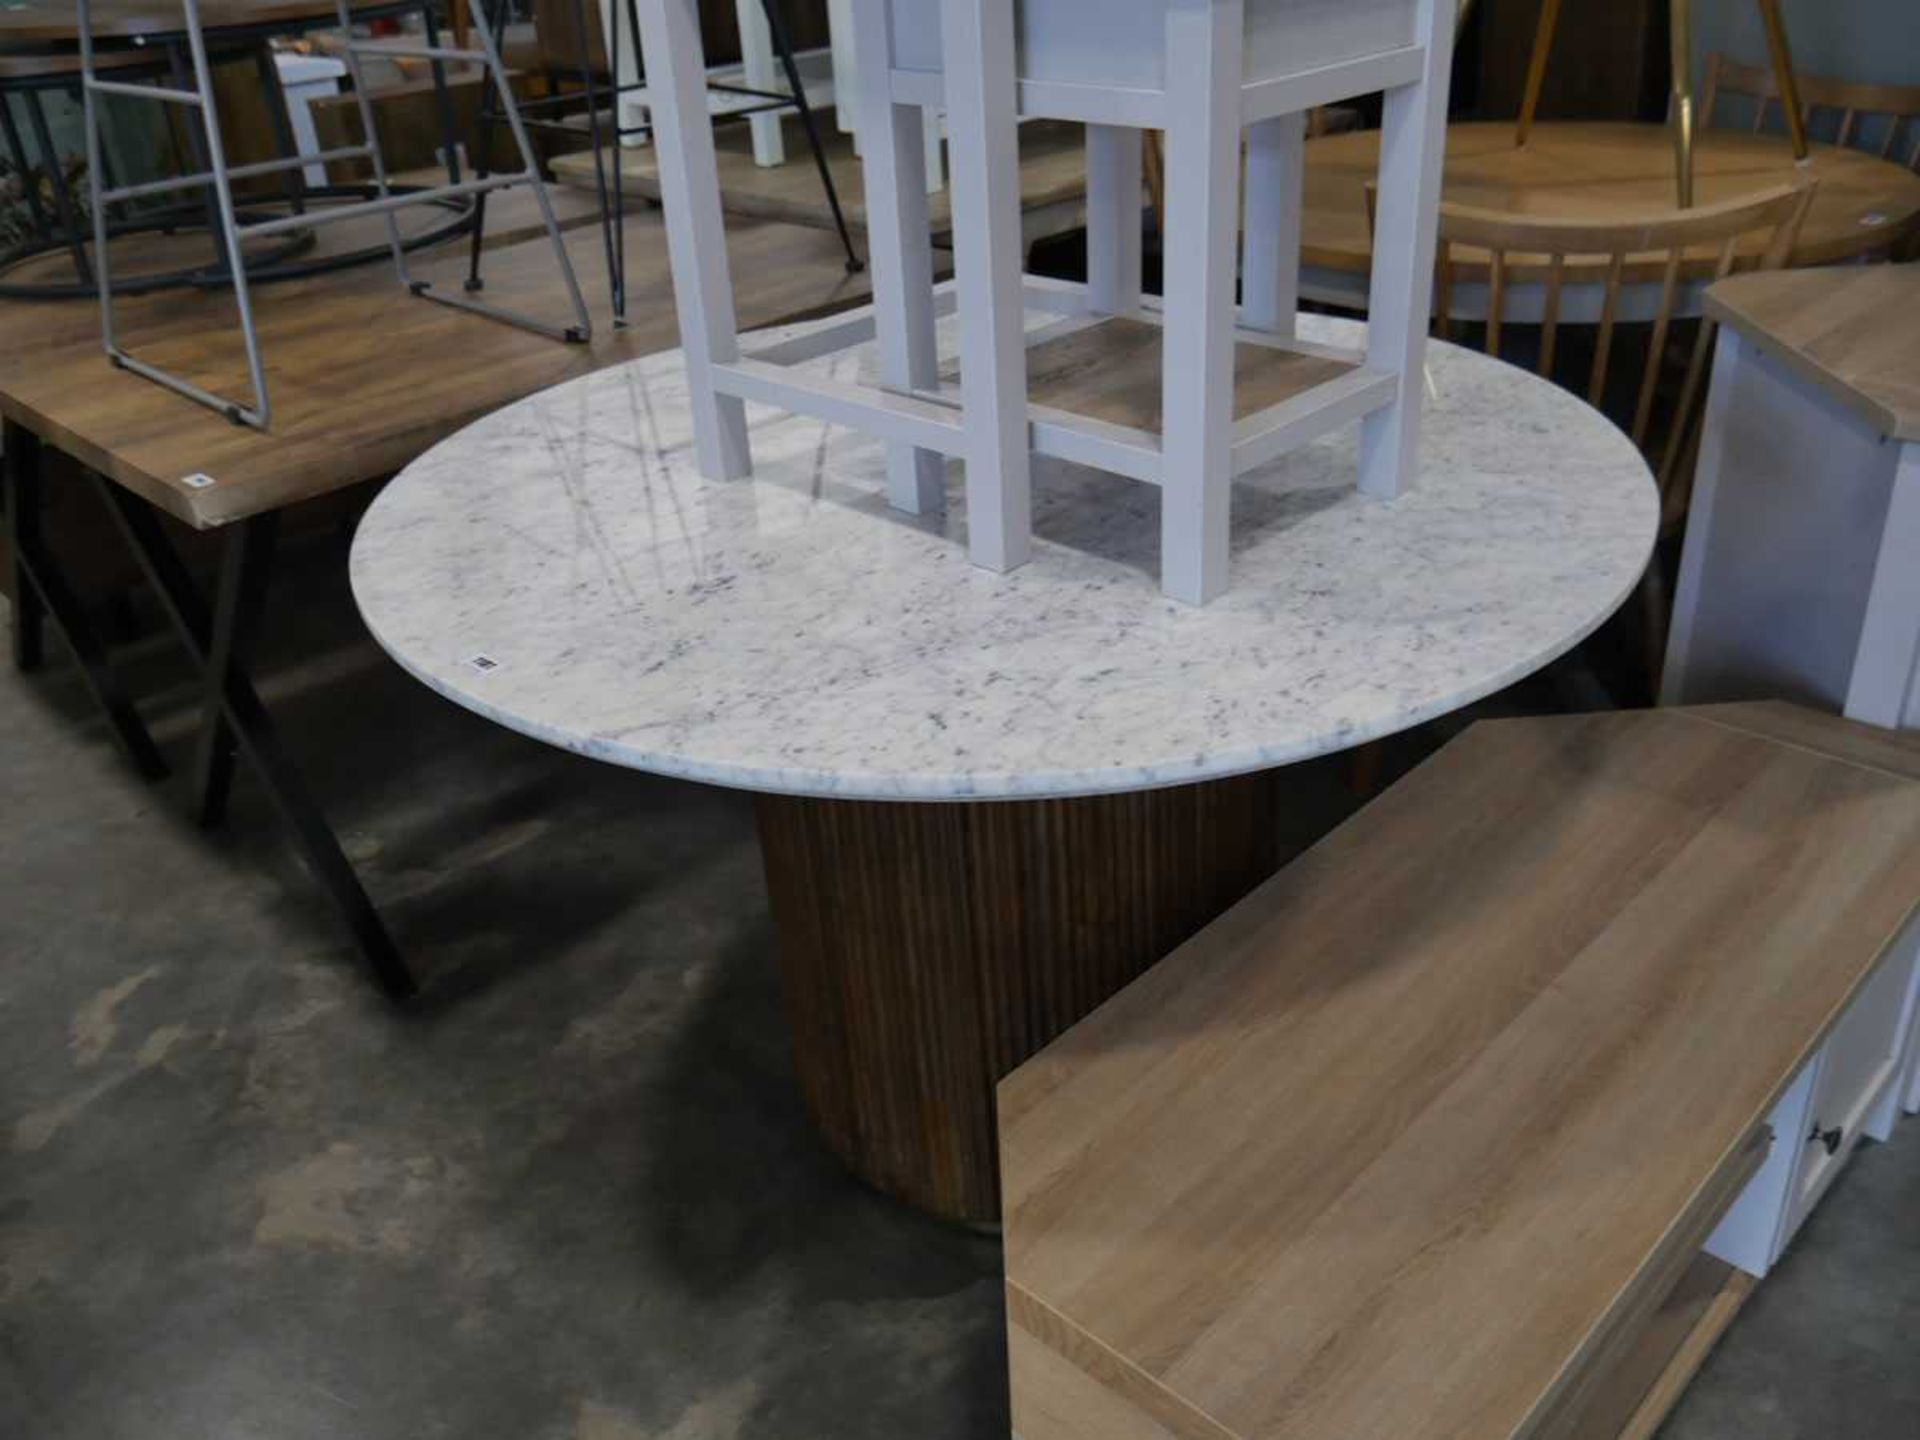 Circular dining table with marble effect surface and single pedestal ribbed wooden column shaped - Image 2 of 2